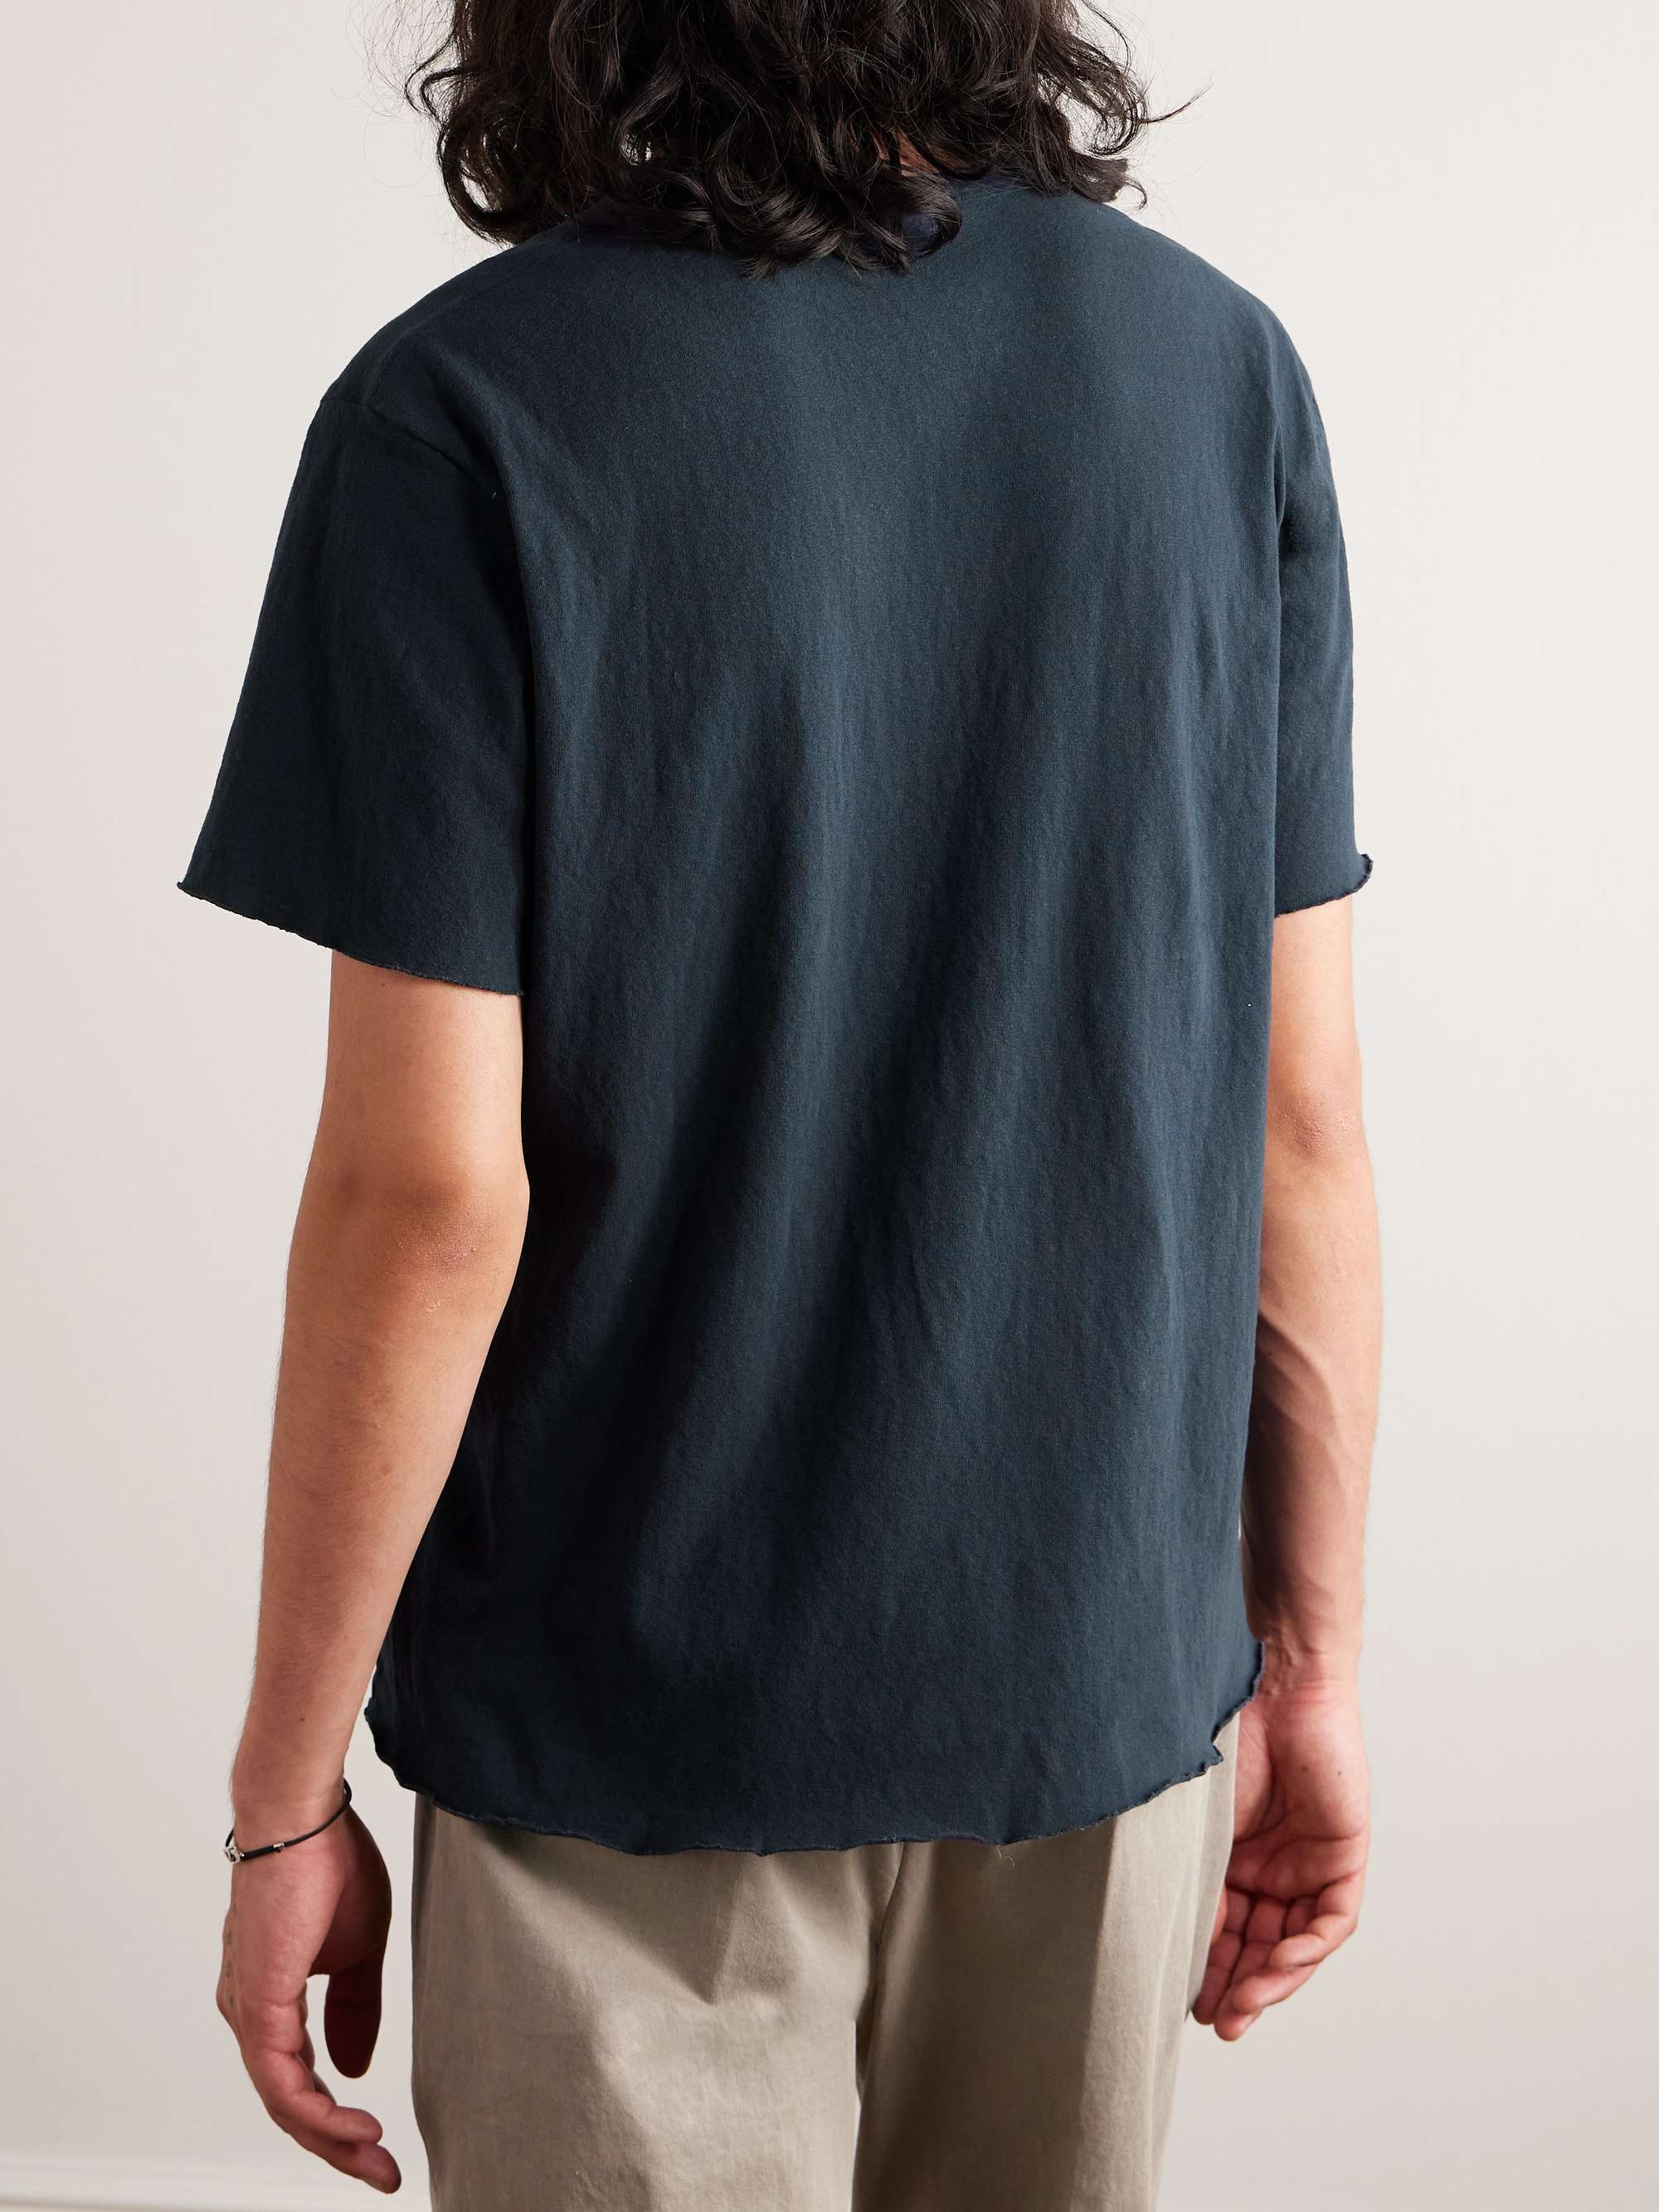 JAMES PERSE Garment-Dyed Brushed Cotton-Blend Jersey T-Shirt